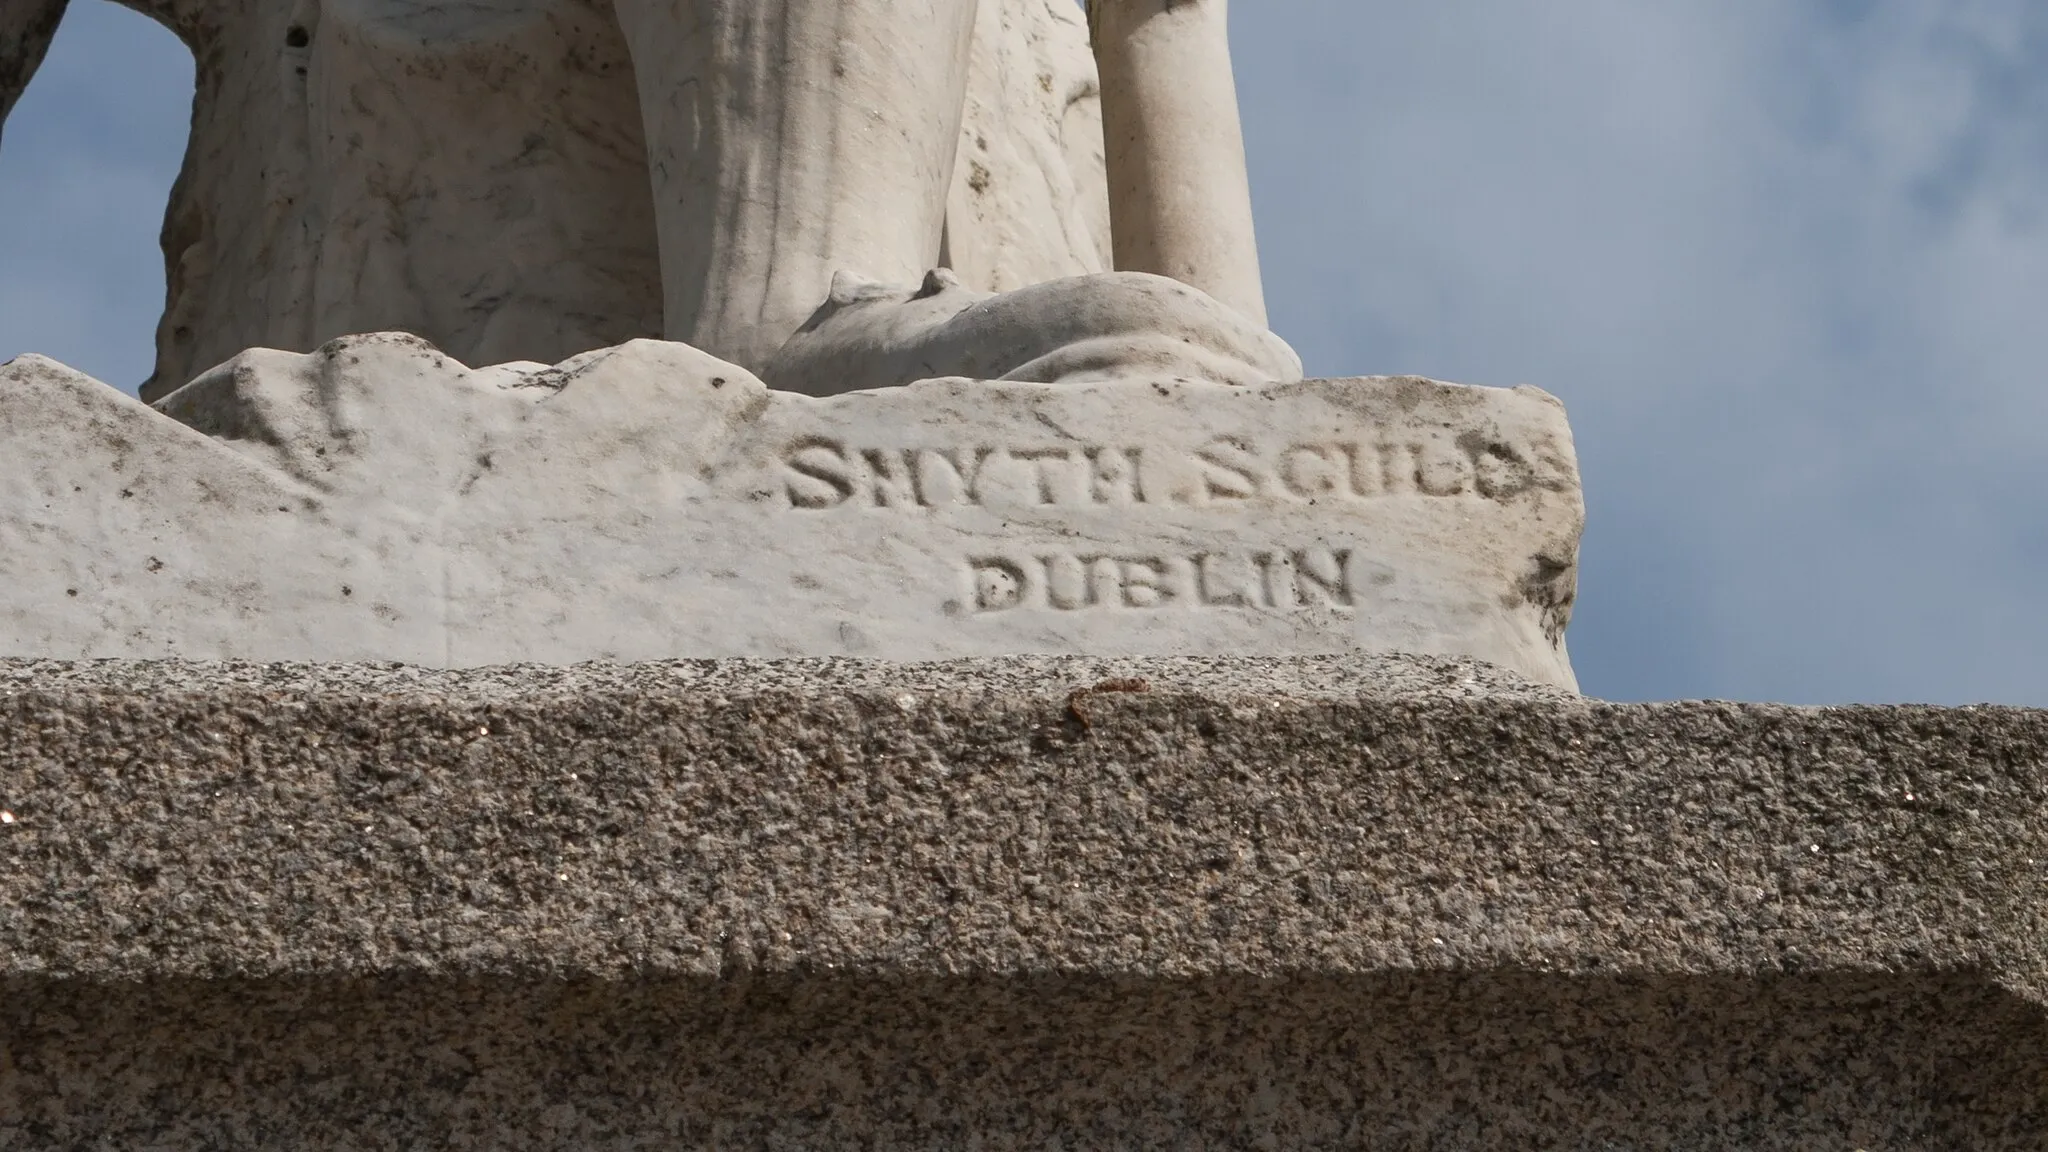 Photo showing: Signature “Smyth. Sculp. Dublin” at the base of the statue of the monument in memory of Michael Dwyer.